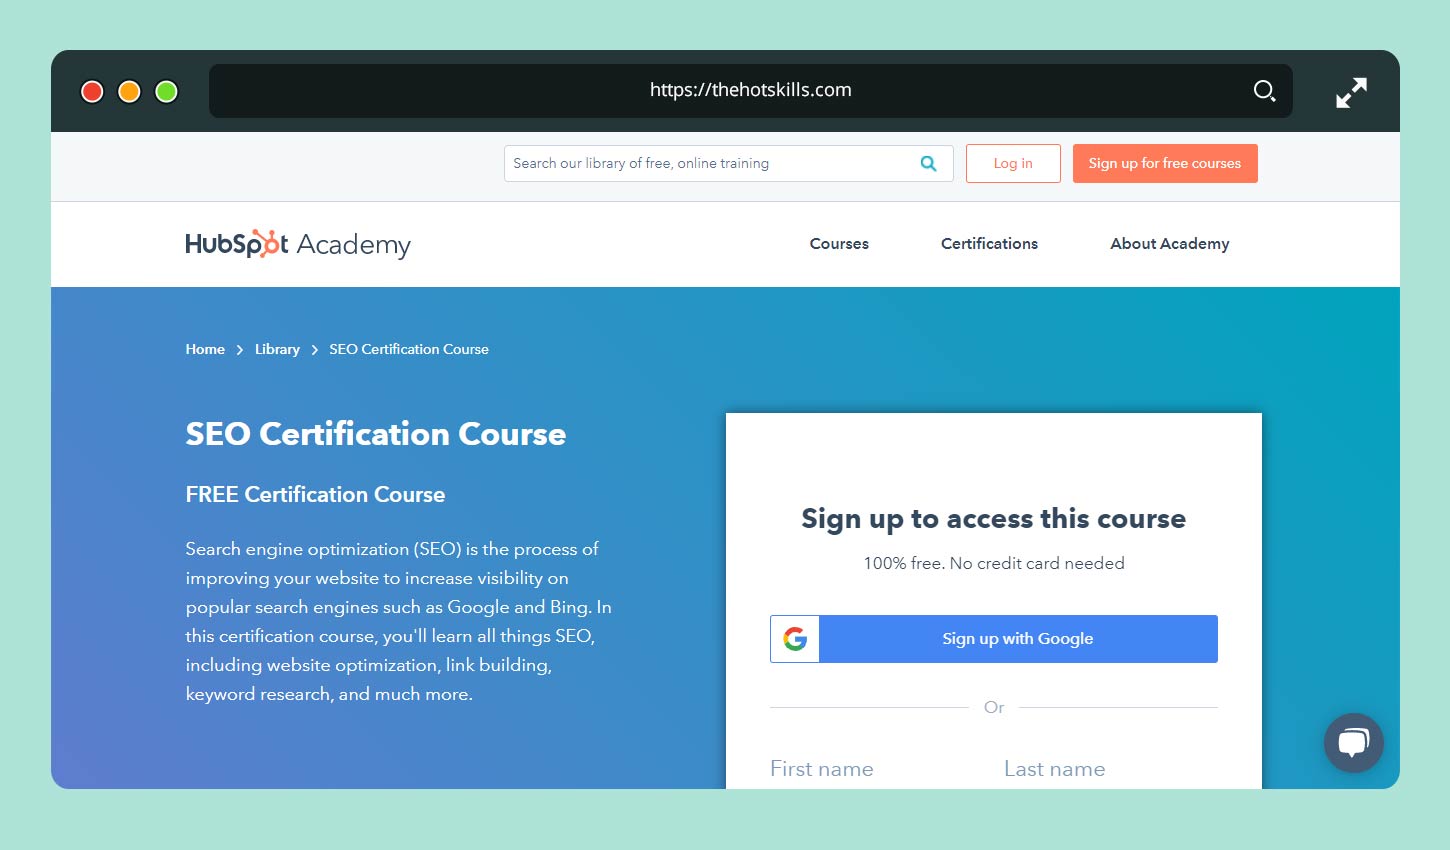 FREE SEO Certification Course